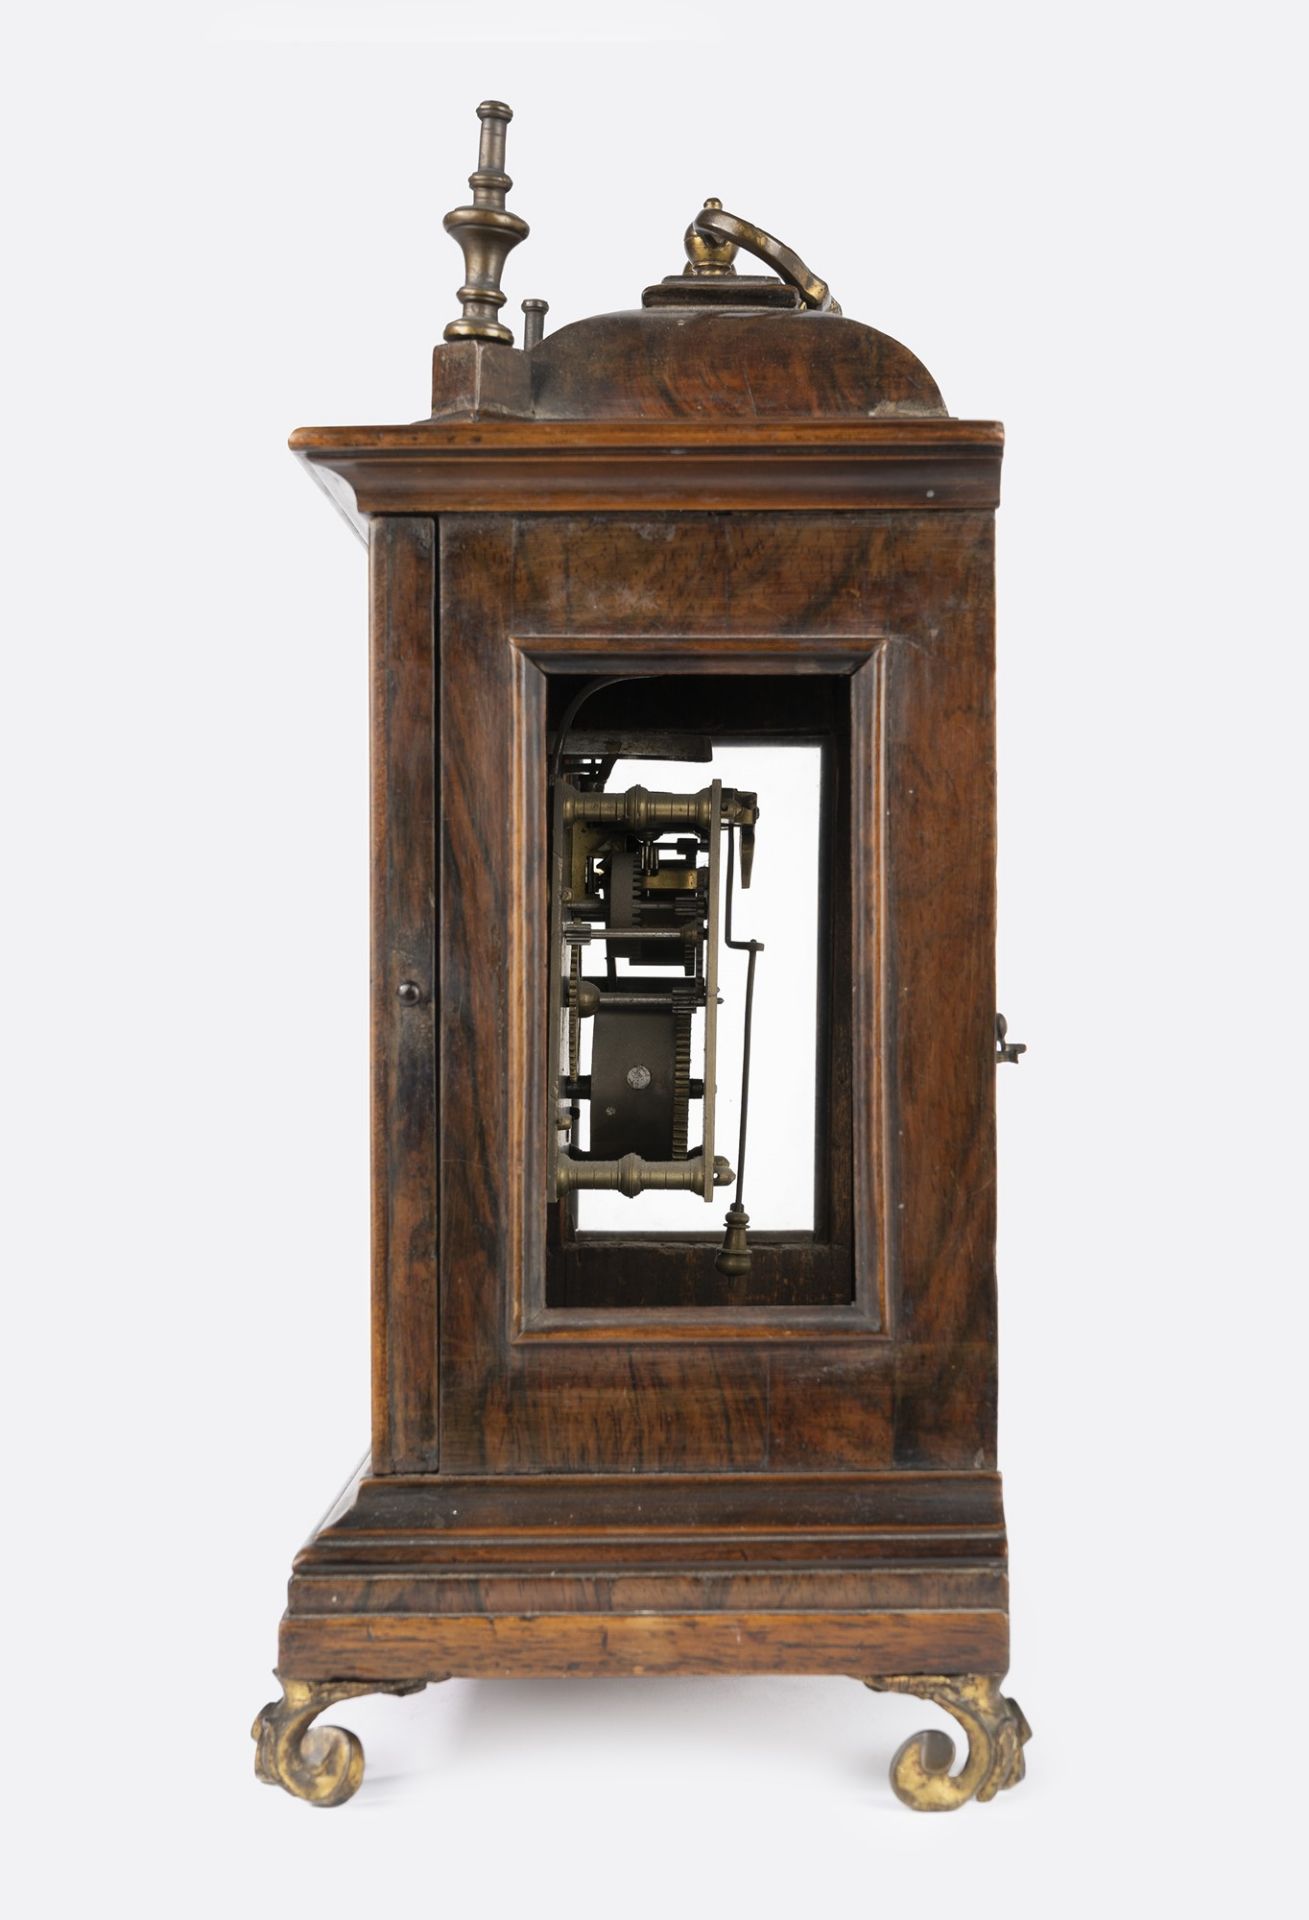 Table clock in wood and bronze, 18th century - Image 2 of 8